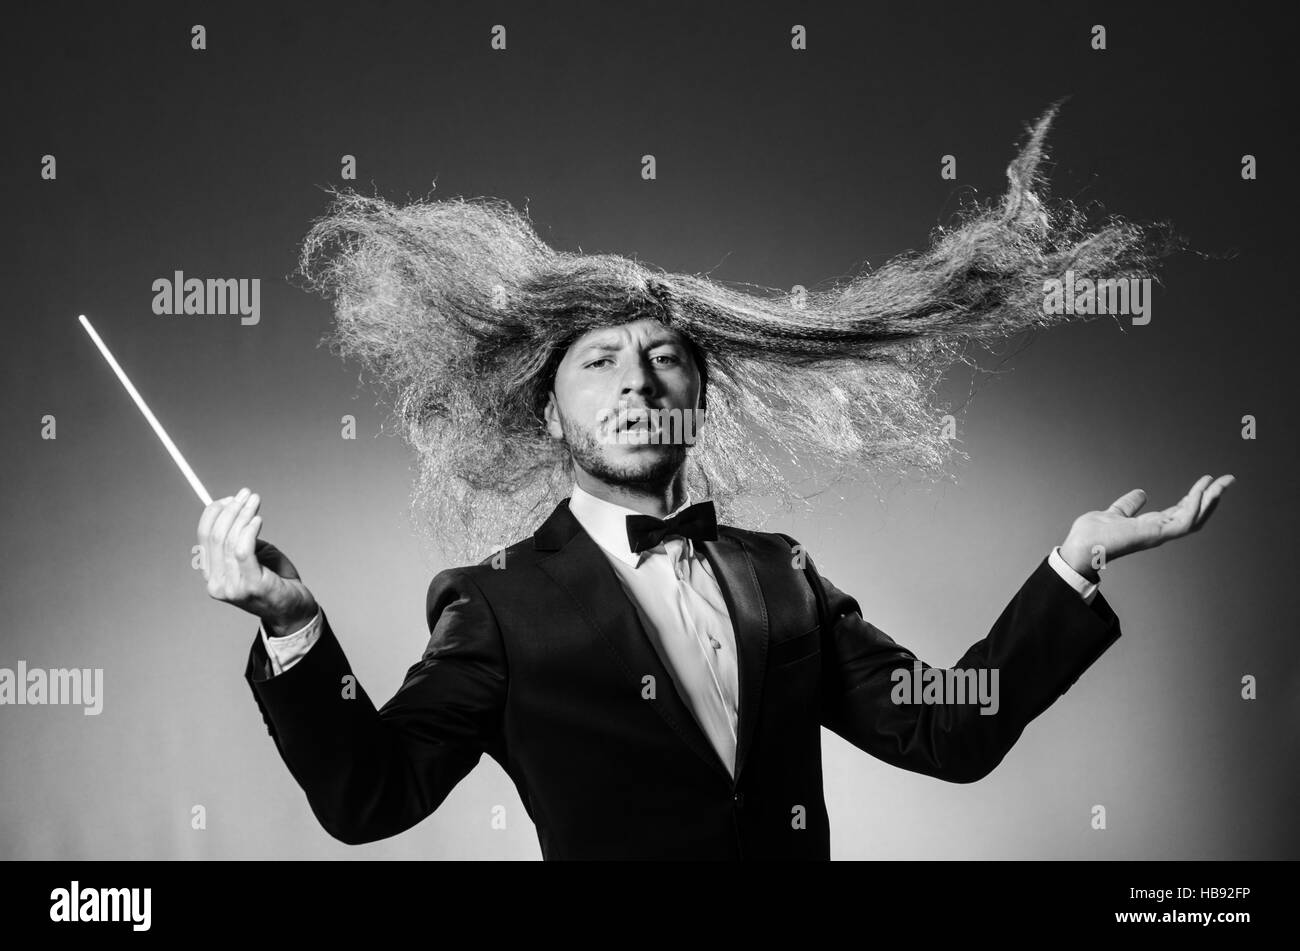 Funny conductor against dark background Stock Photo